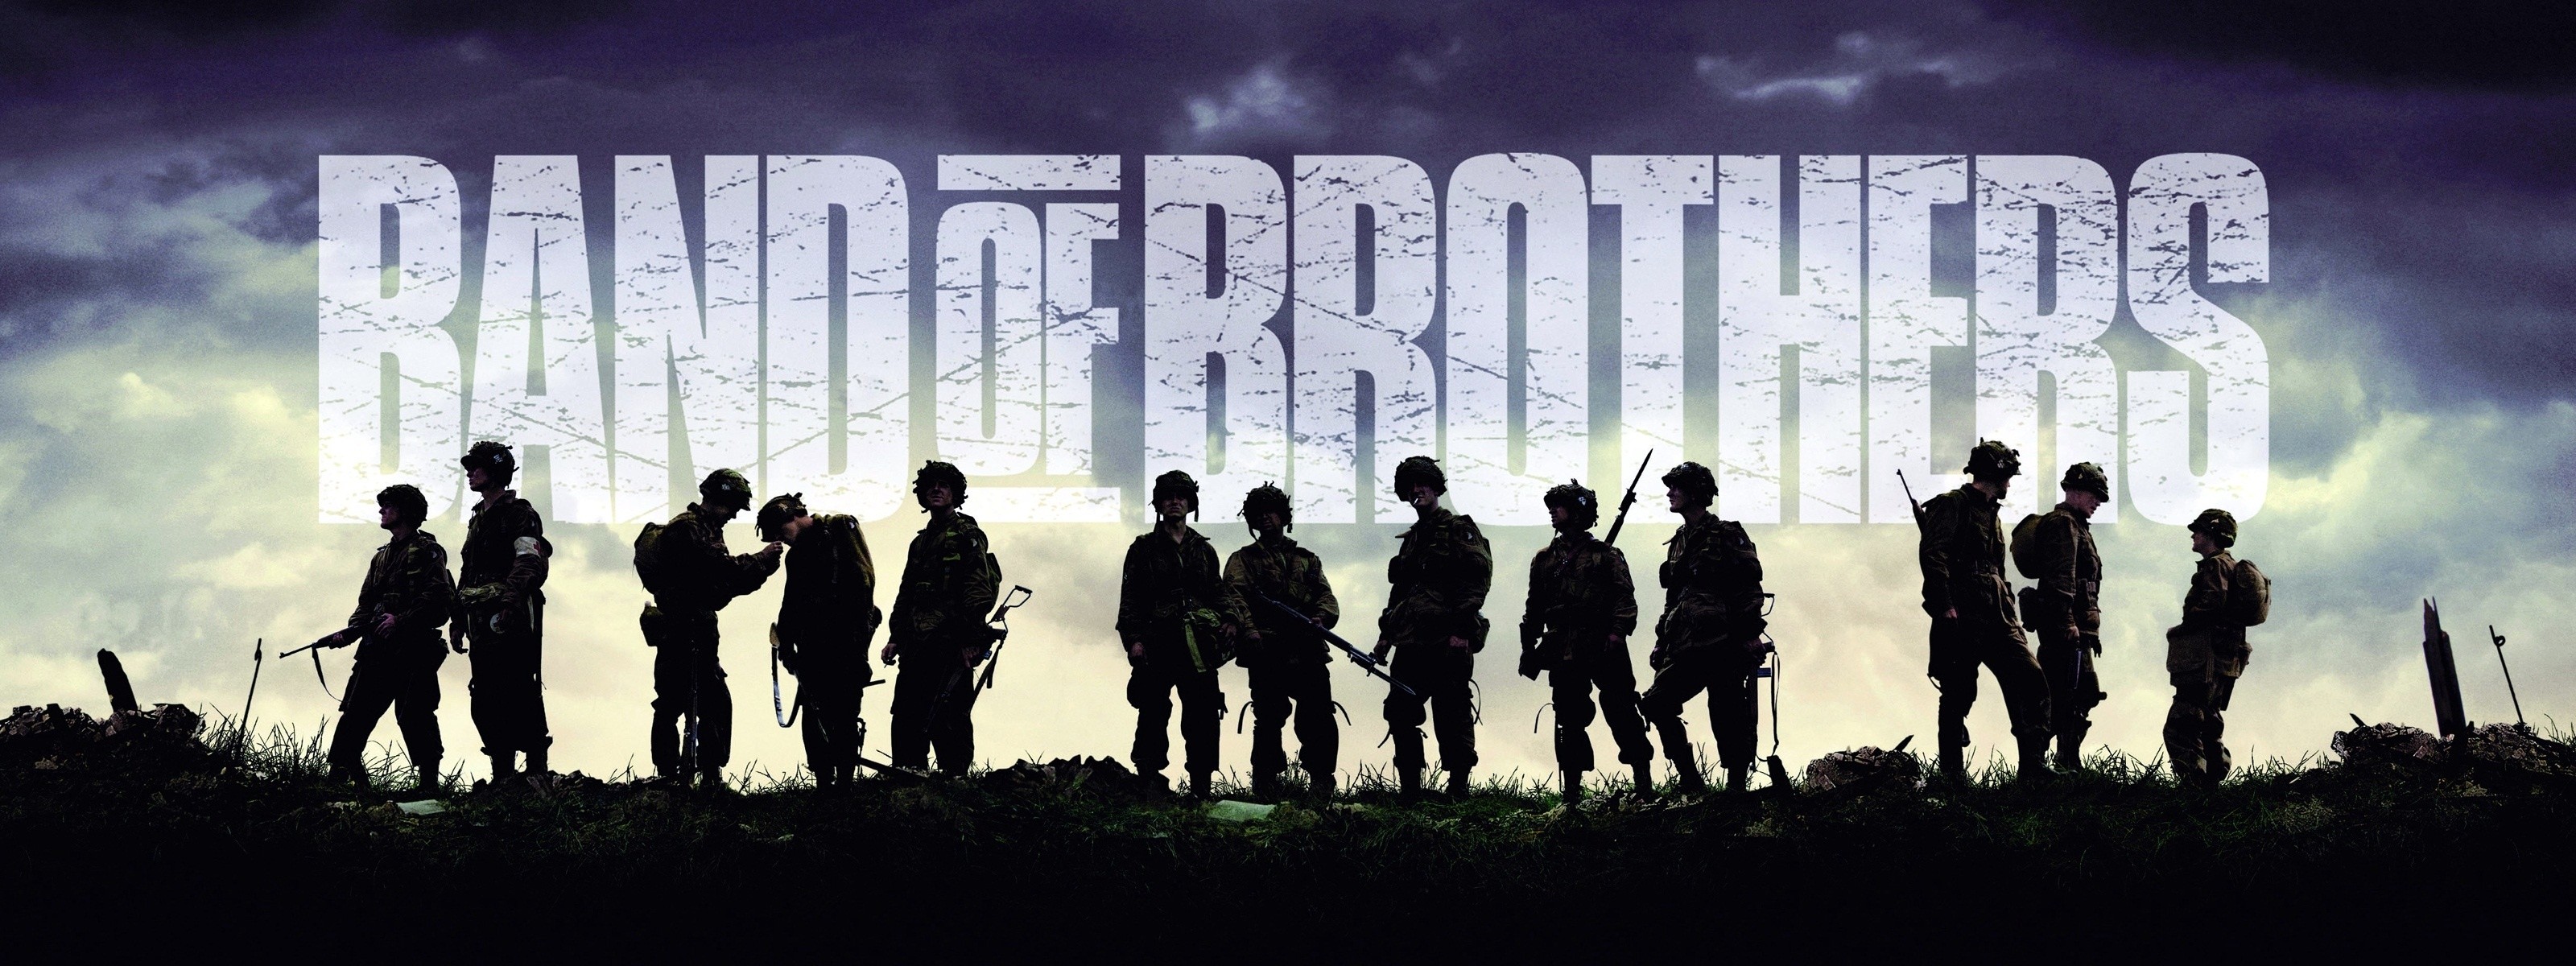 Band Of Brothers Tv Series Wallpapers Hd 3200 1200 3200x1200